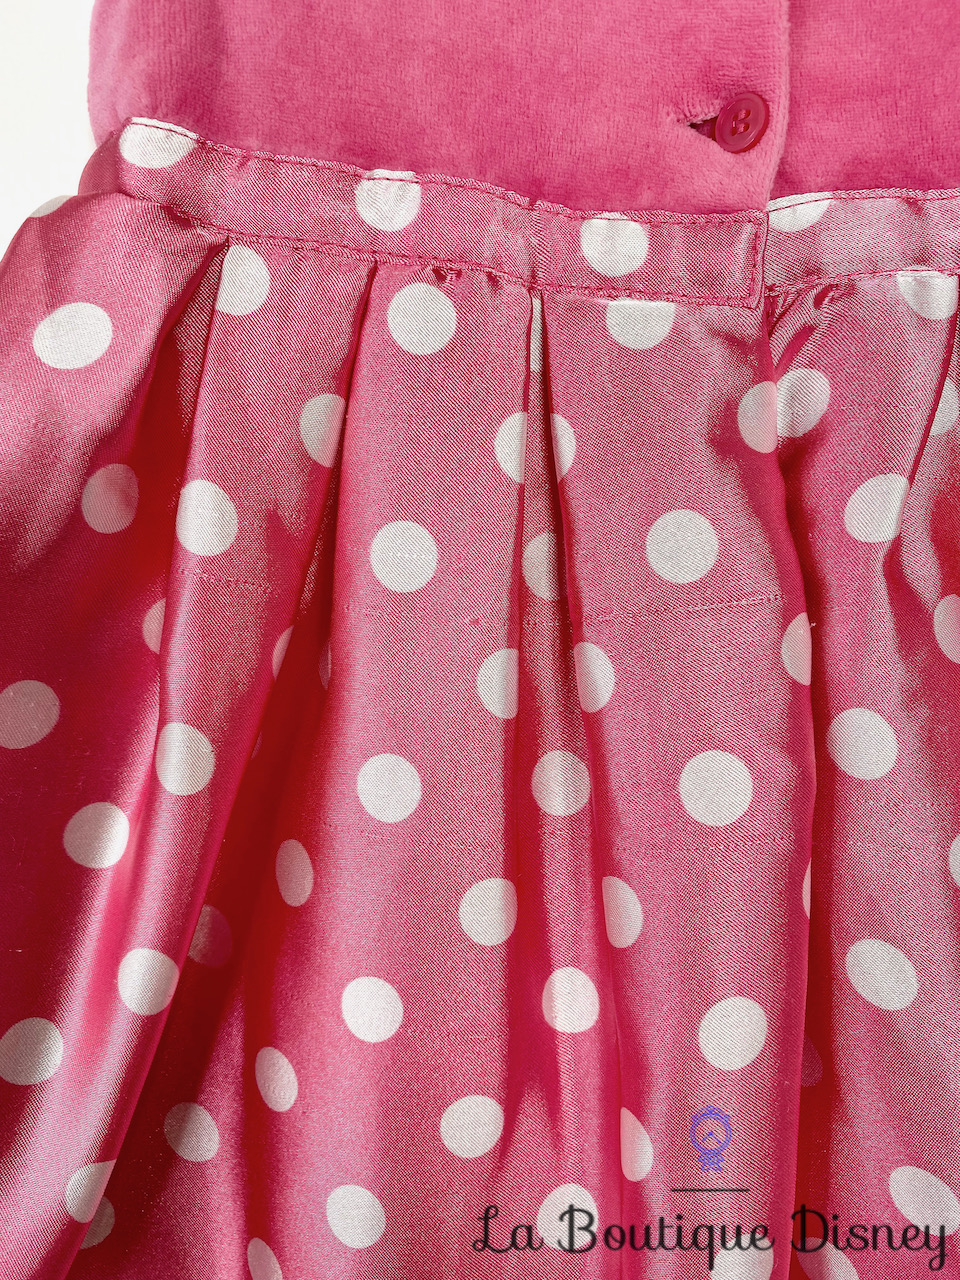 robe-minnie-mouse-disney-store-rose-pois-blanc-broderie-jupon-velour-0